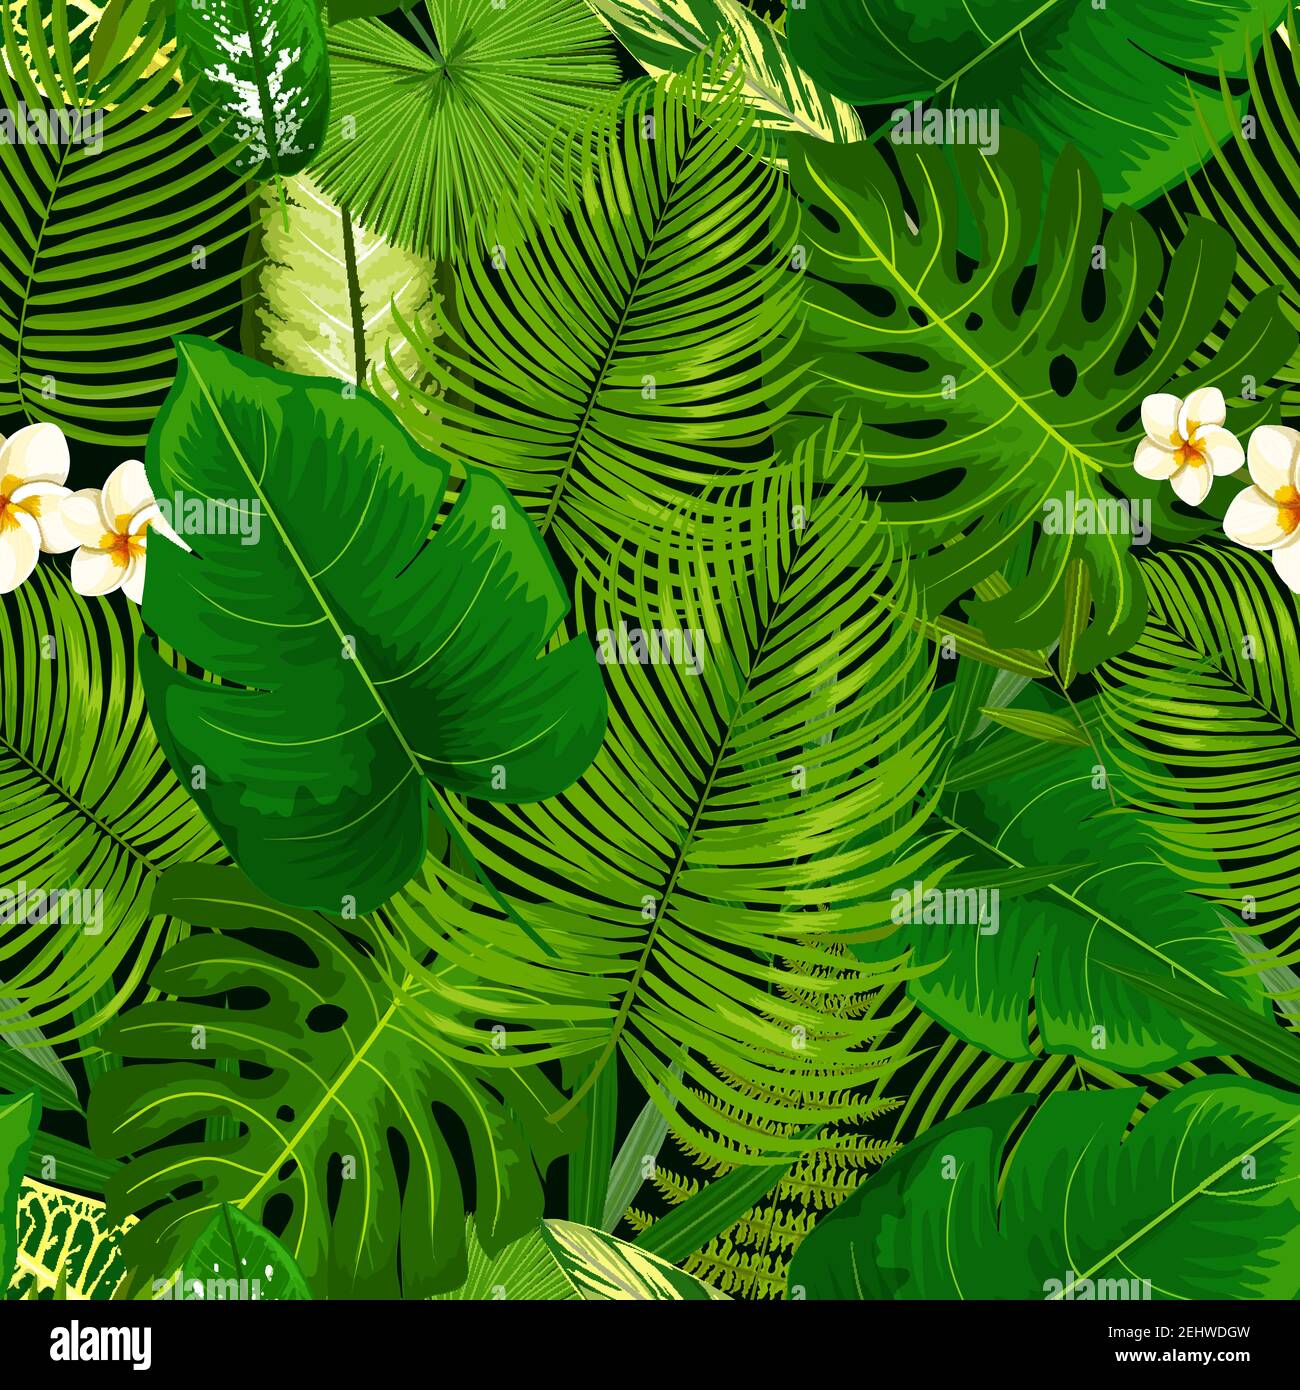 Tropical leaf and flowers seamless pattern. Vector background of green exotic plumeria blossom, banana palm, areca or monstera leaves and fern plant, Stock Vector